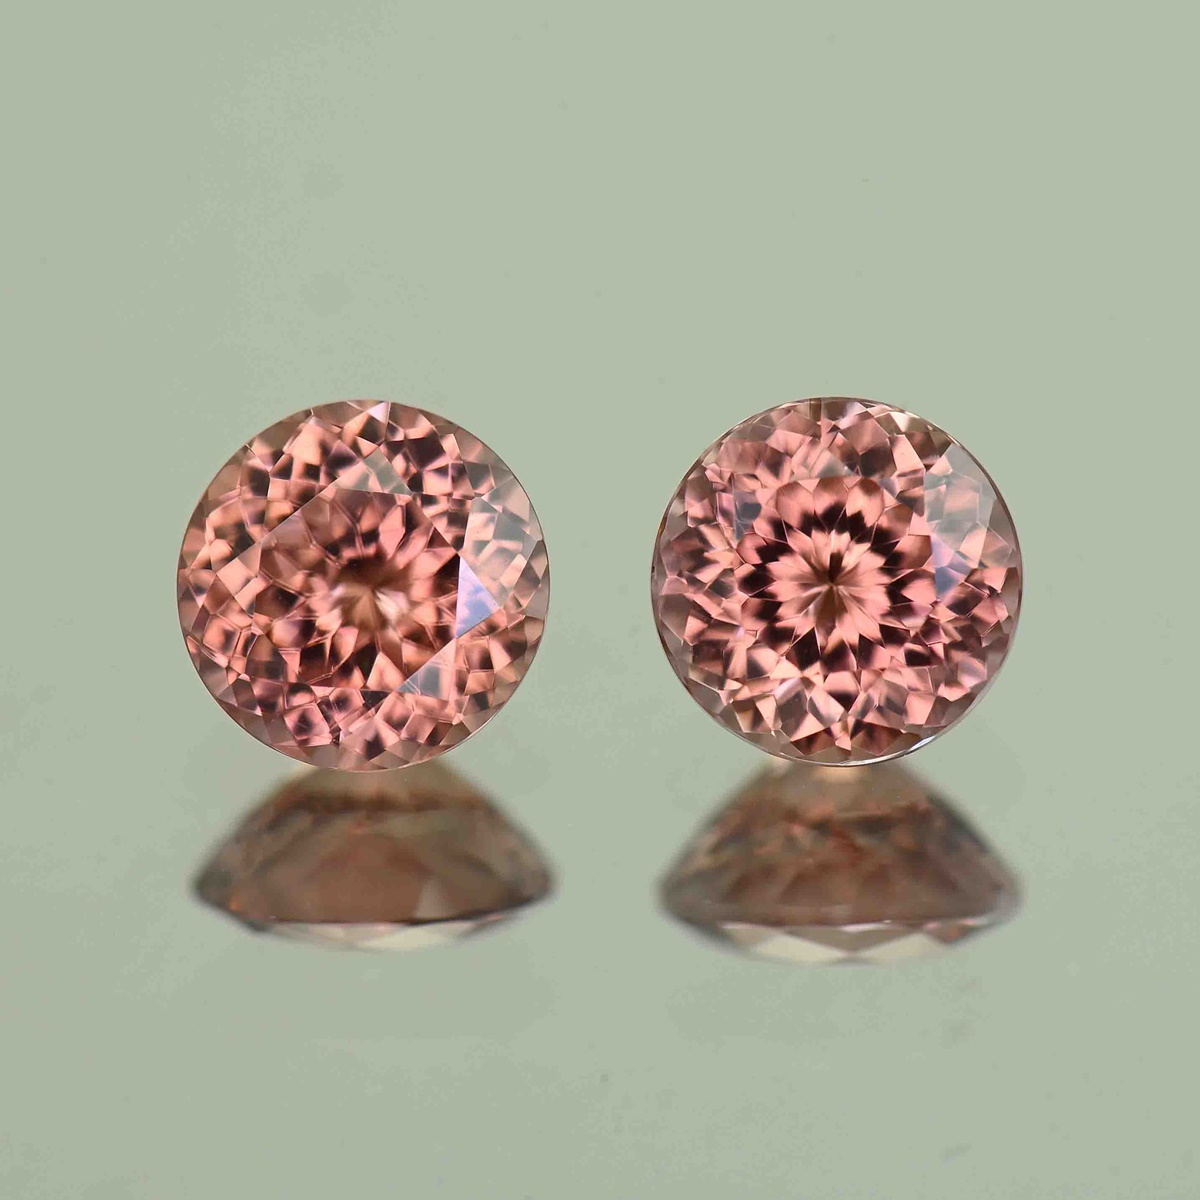 RoseZircon_round_pair_6.5mm_3.21cts_H_zn4064